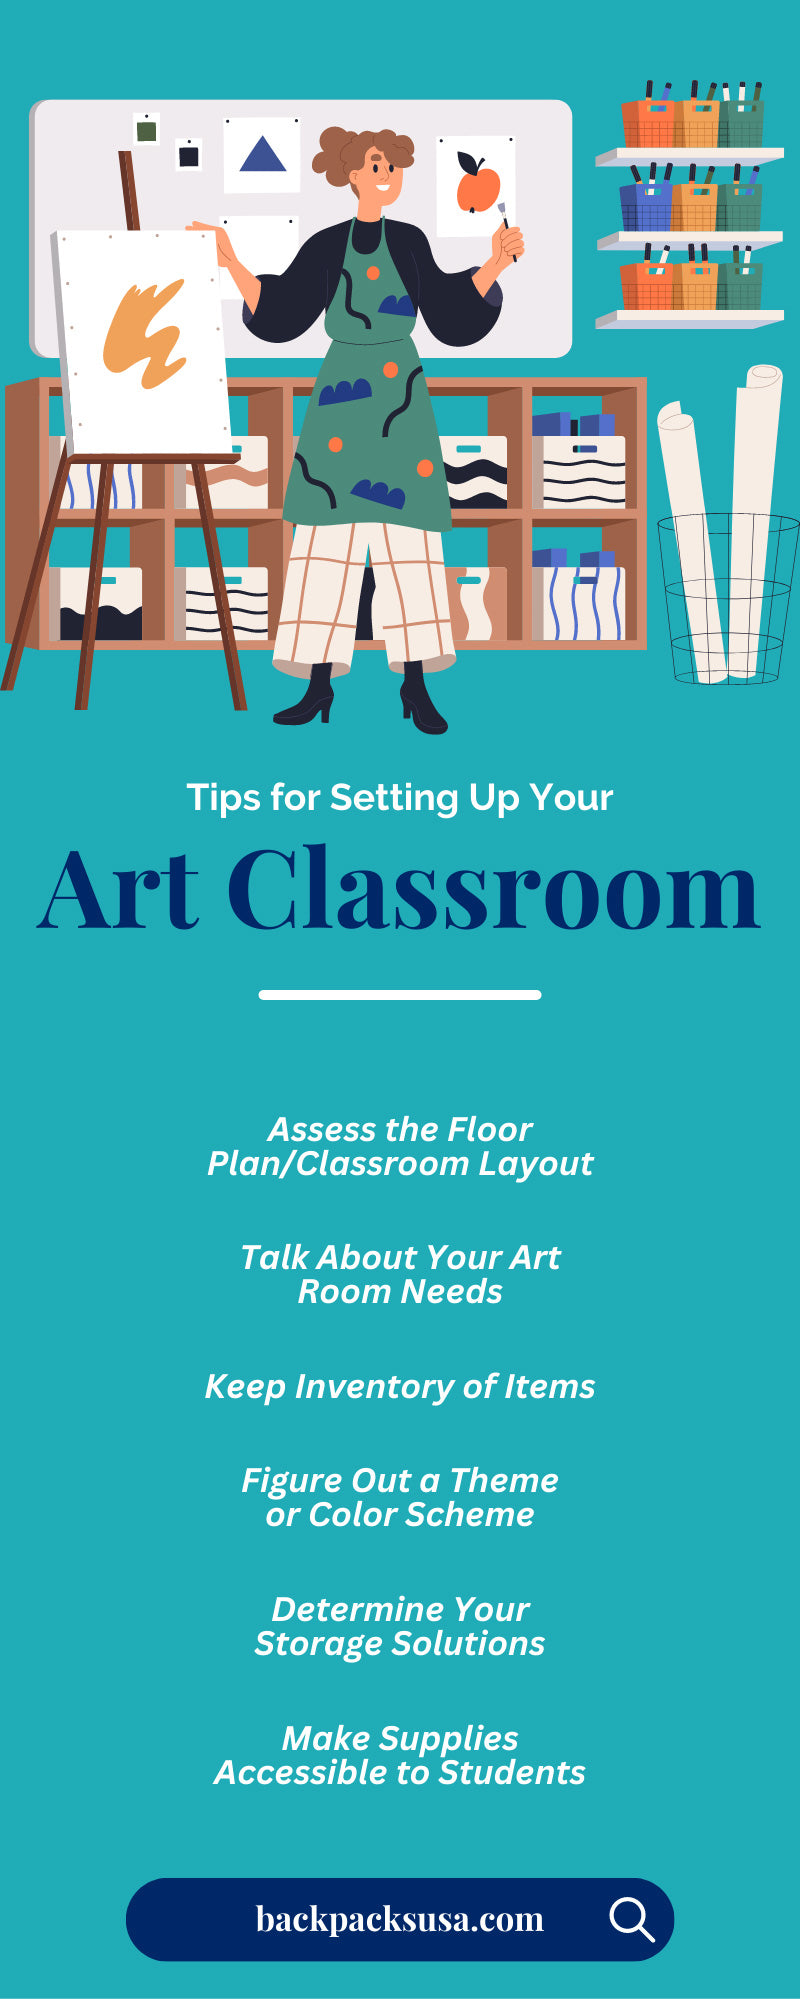 8 Tips for Setting Up Your Art Classroom